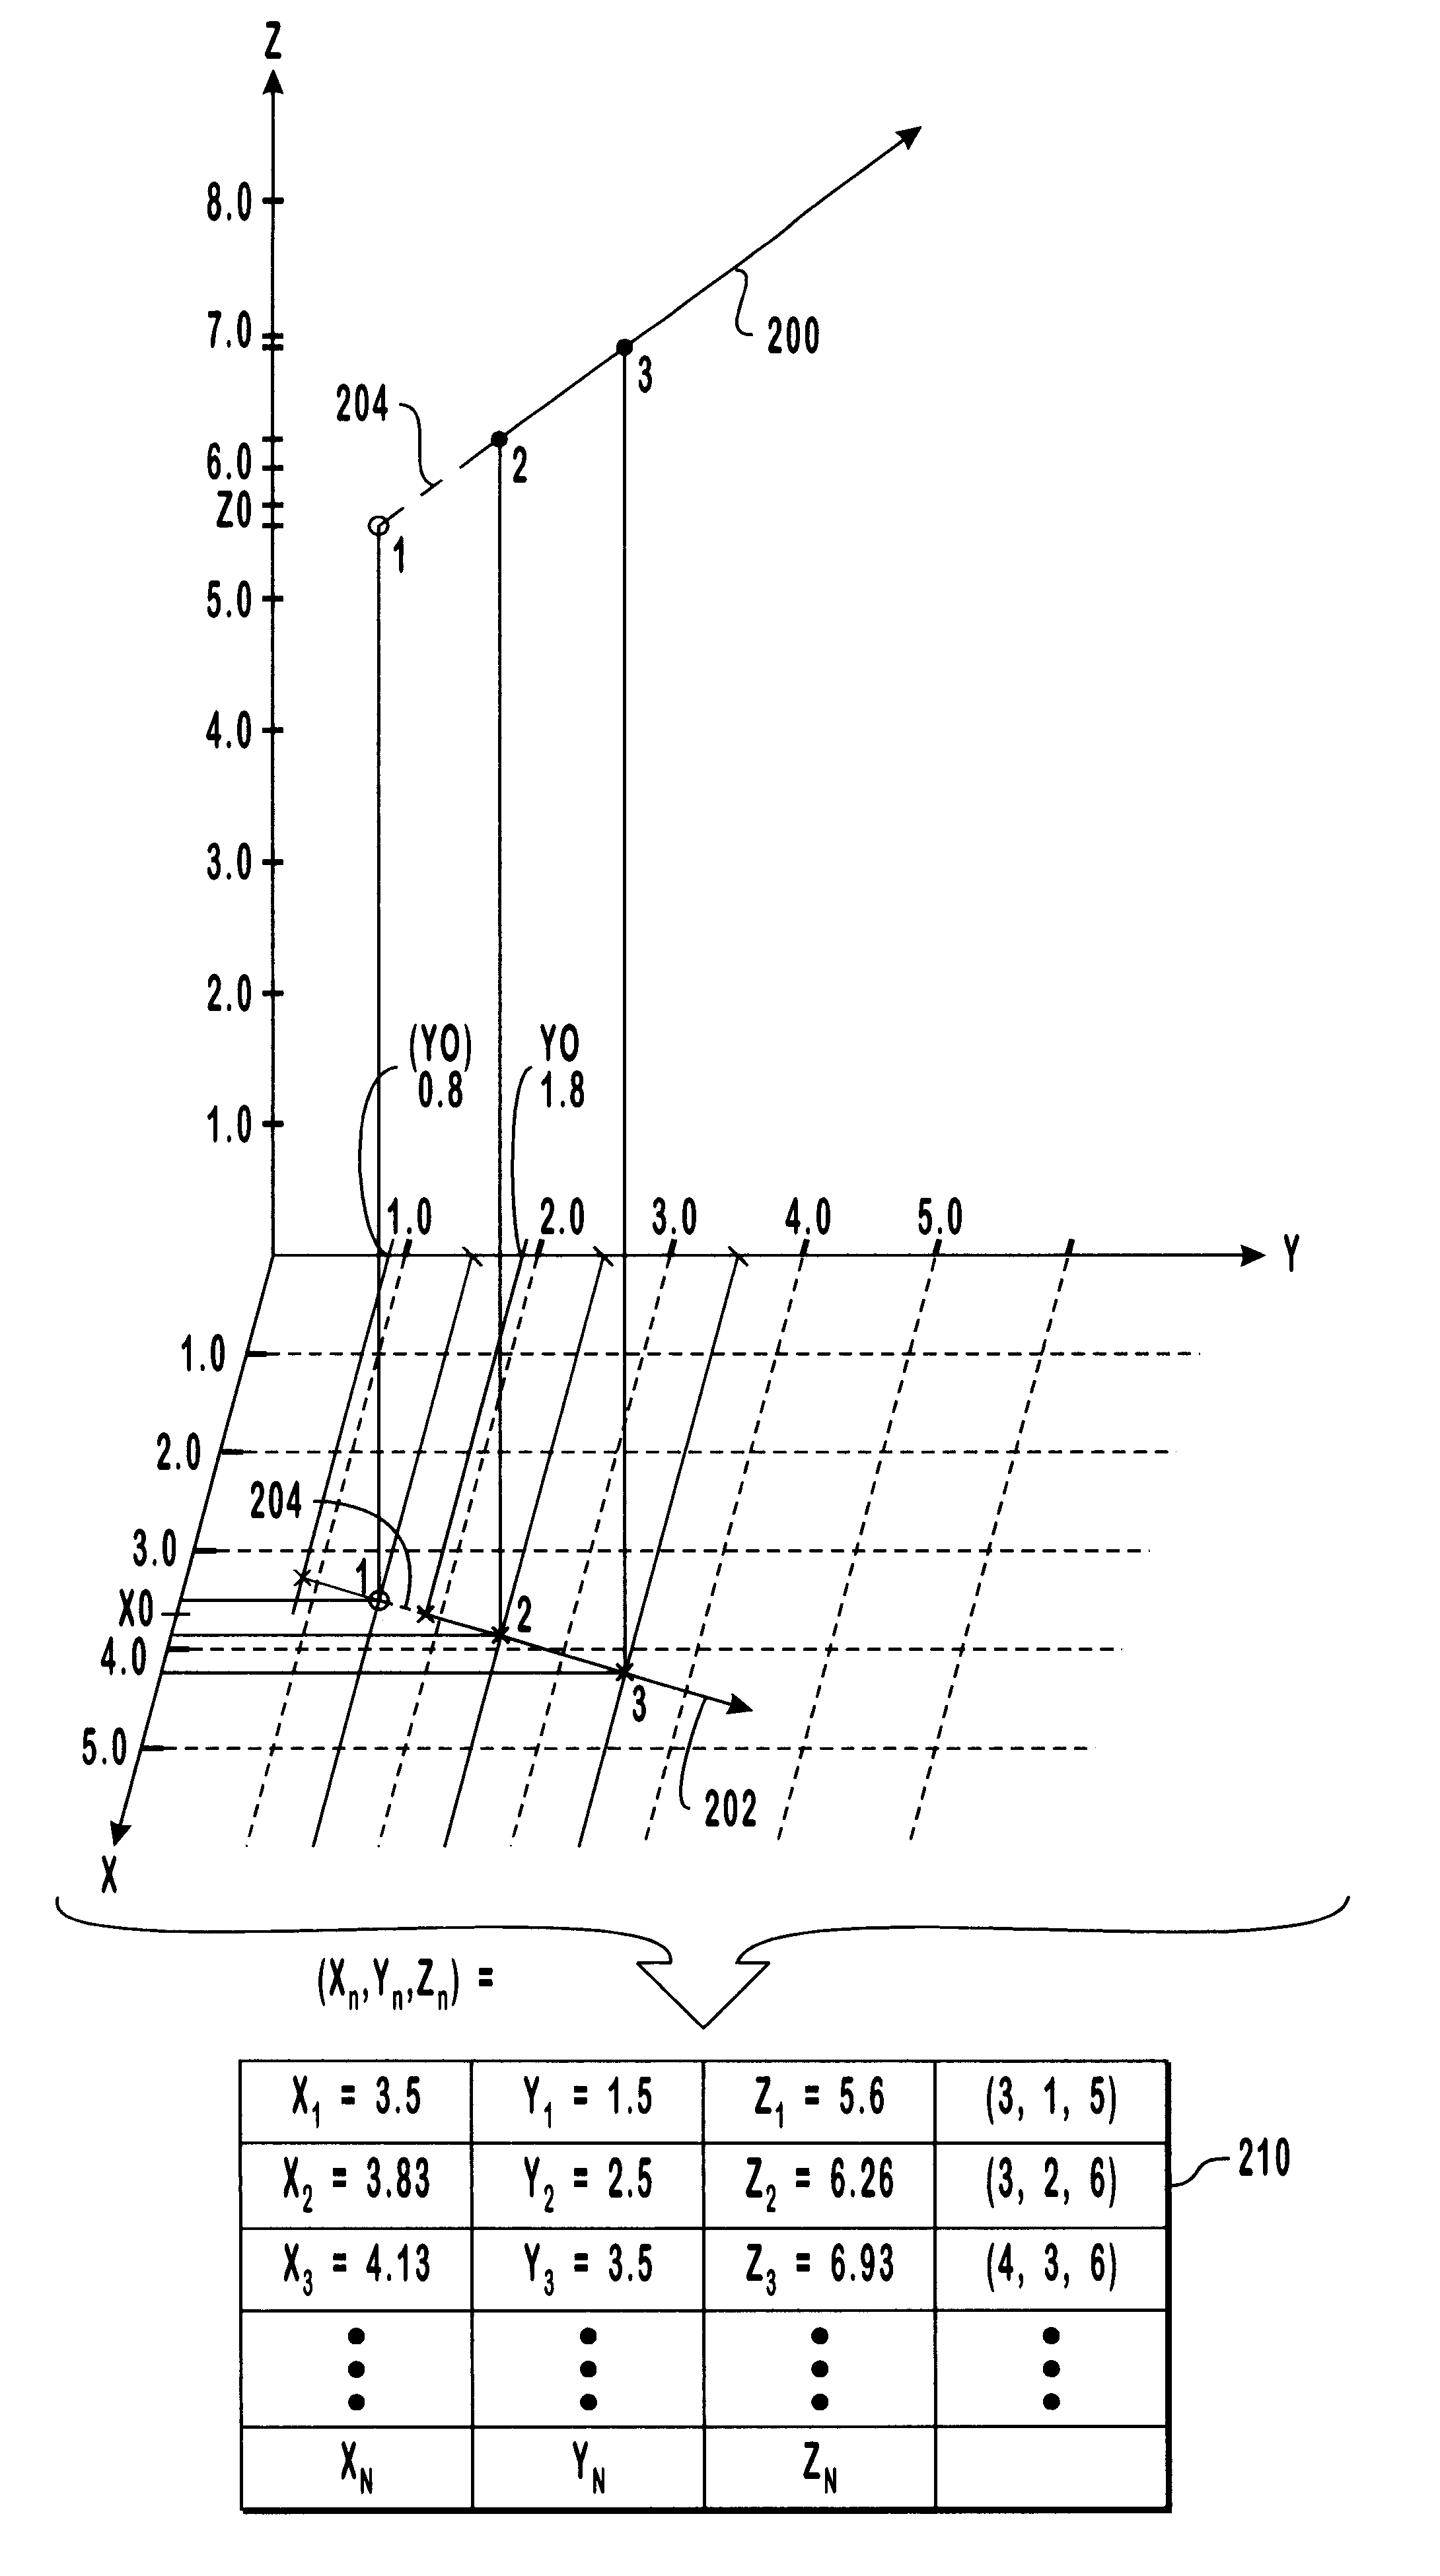 Methods and computer executable instructions for rapidly calculating simulated particle transport through geometrically modeled treatment volumes having uniform volume elements for use in radiotherapy